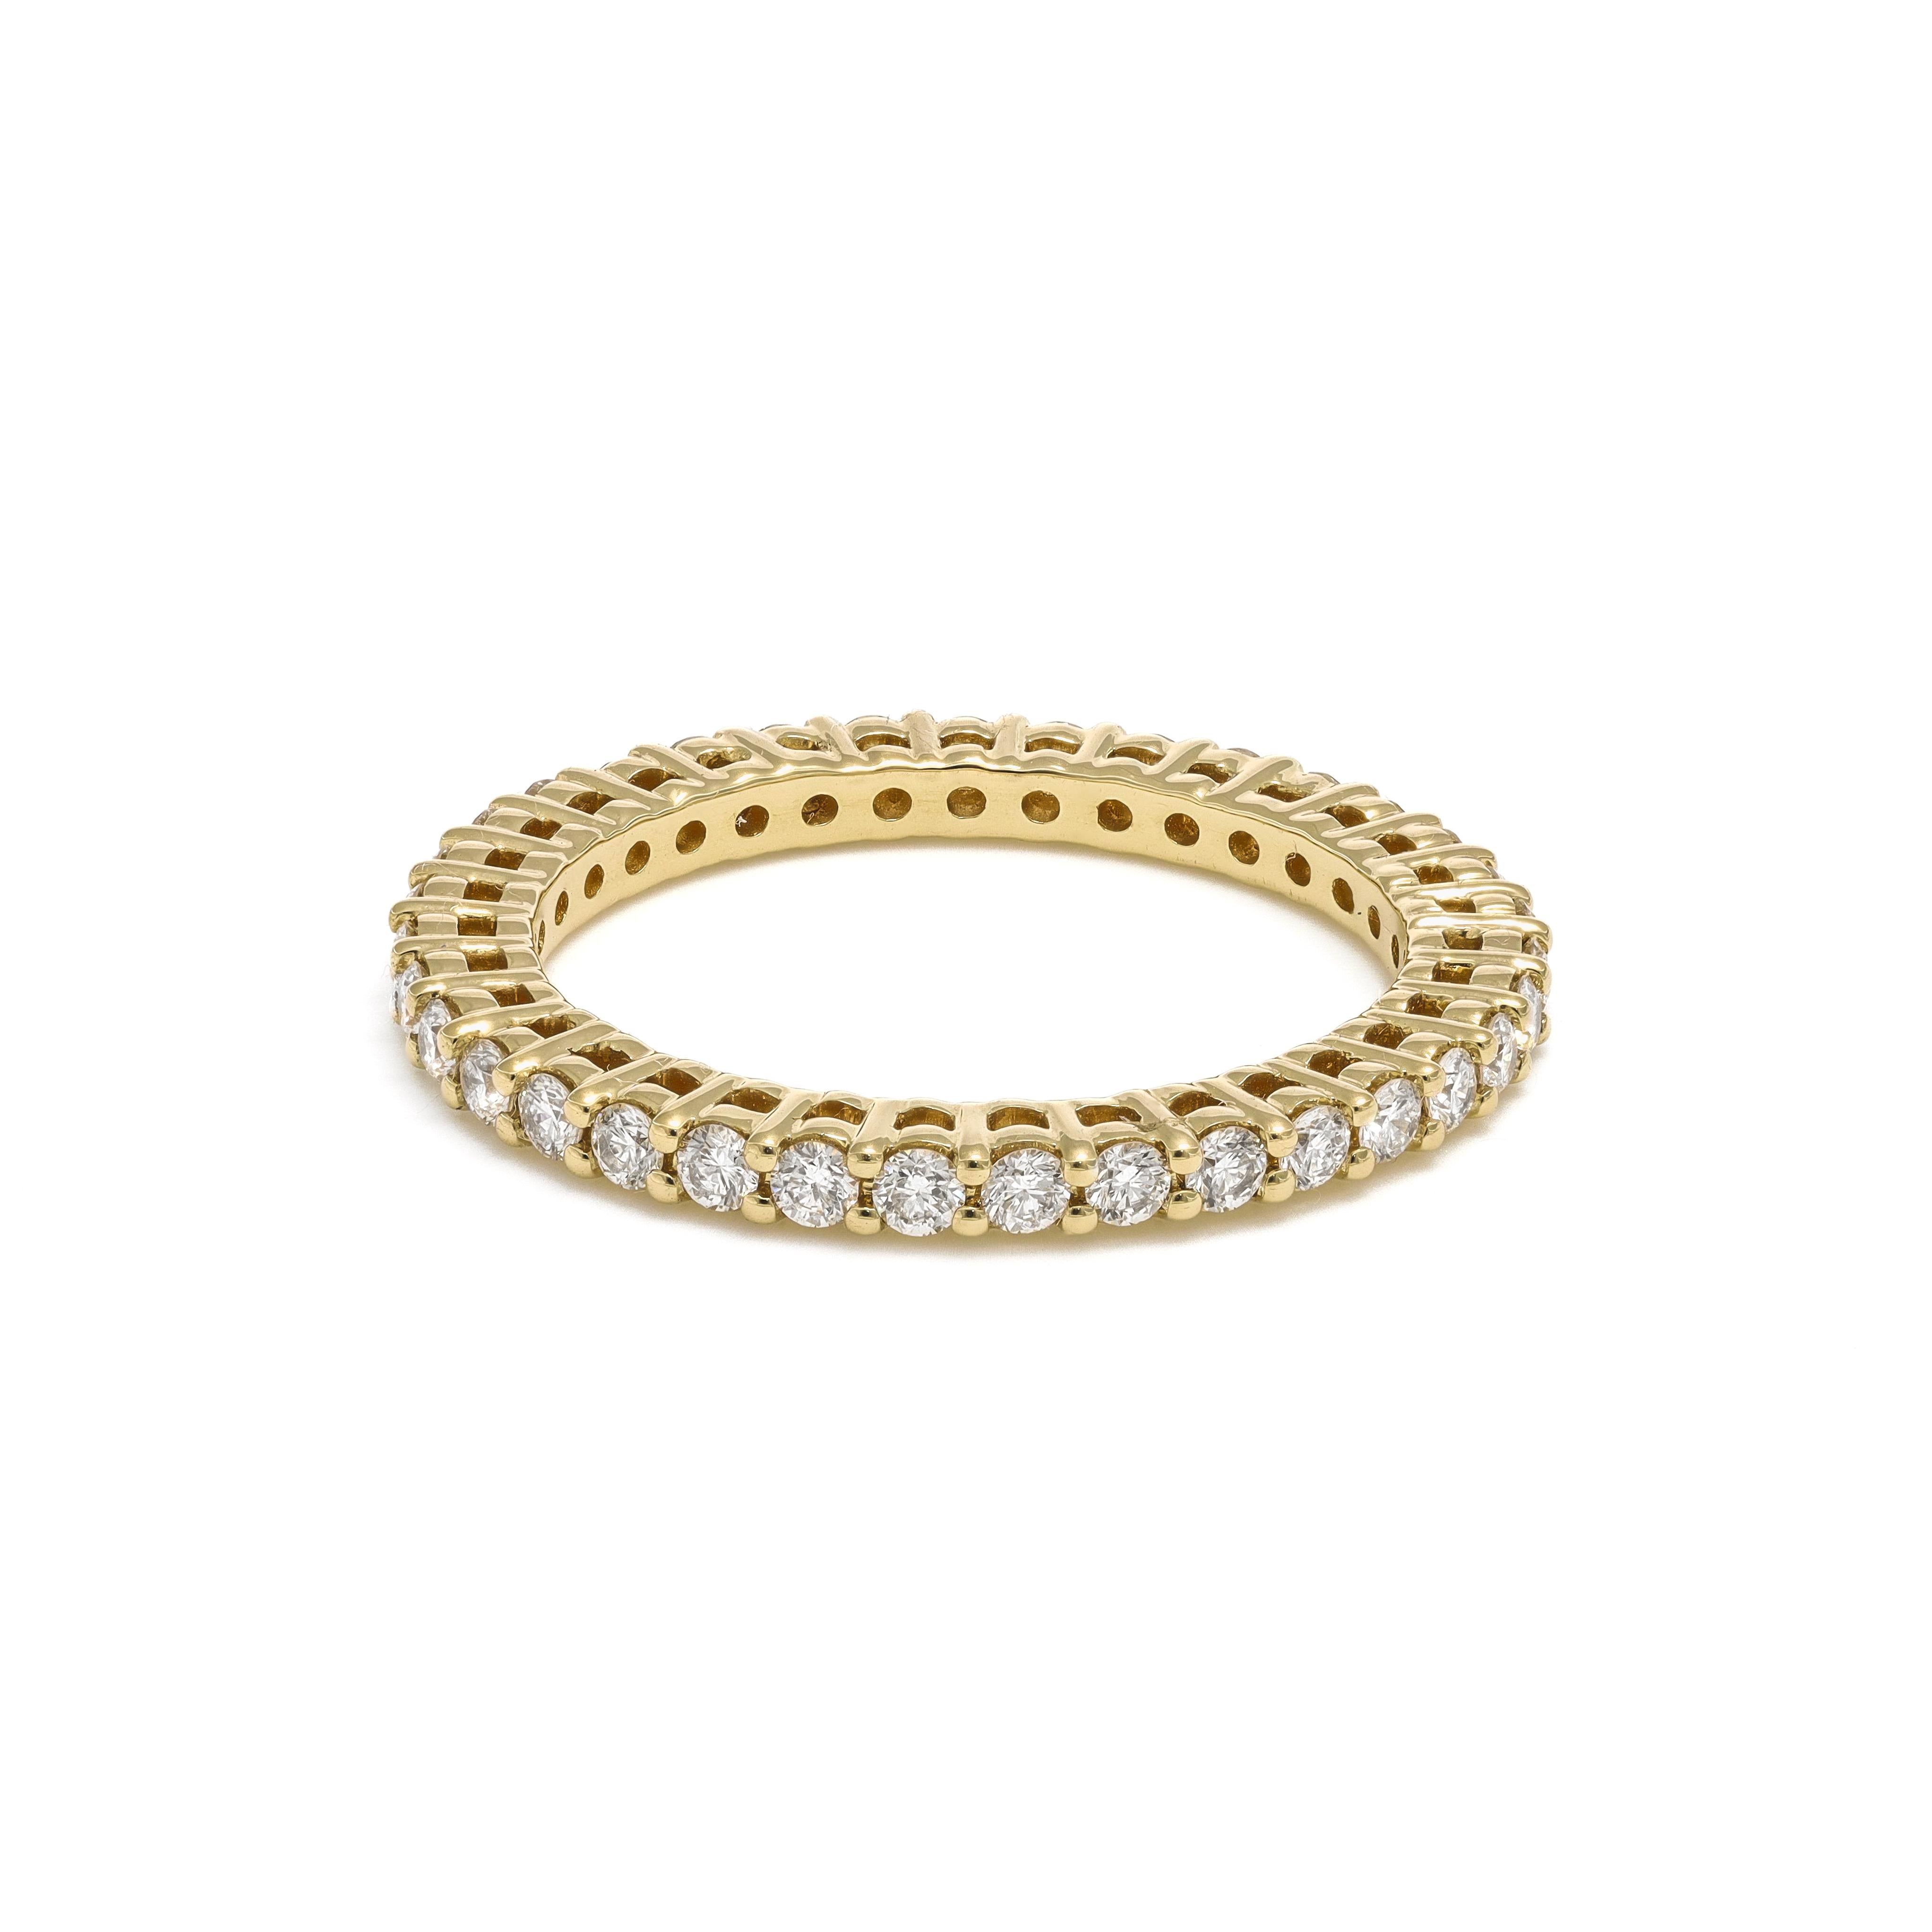 Indulge in the timeless allure of this exquisite diamond band, meticulously crafted from 18k Yellow Gold to radiate elegance and sophistication. The band features a continuous row of round-shape diamonds, totaling 0.80 carats, set in a seamless and